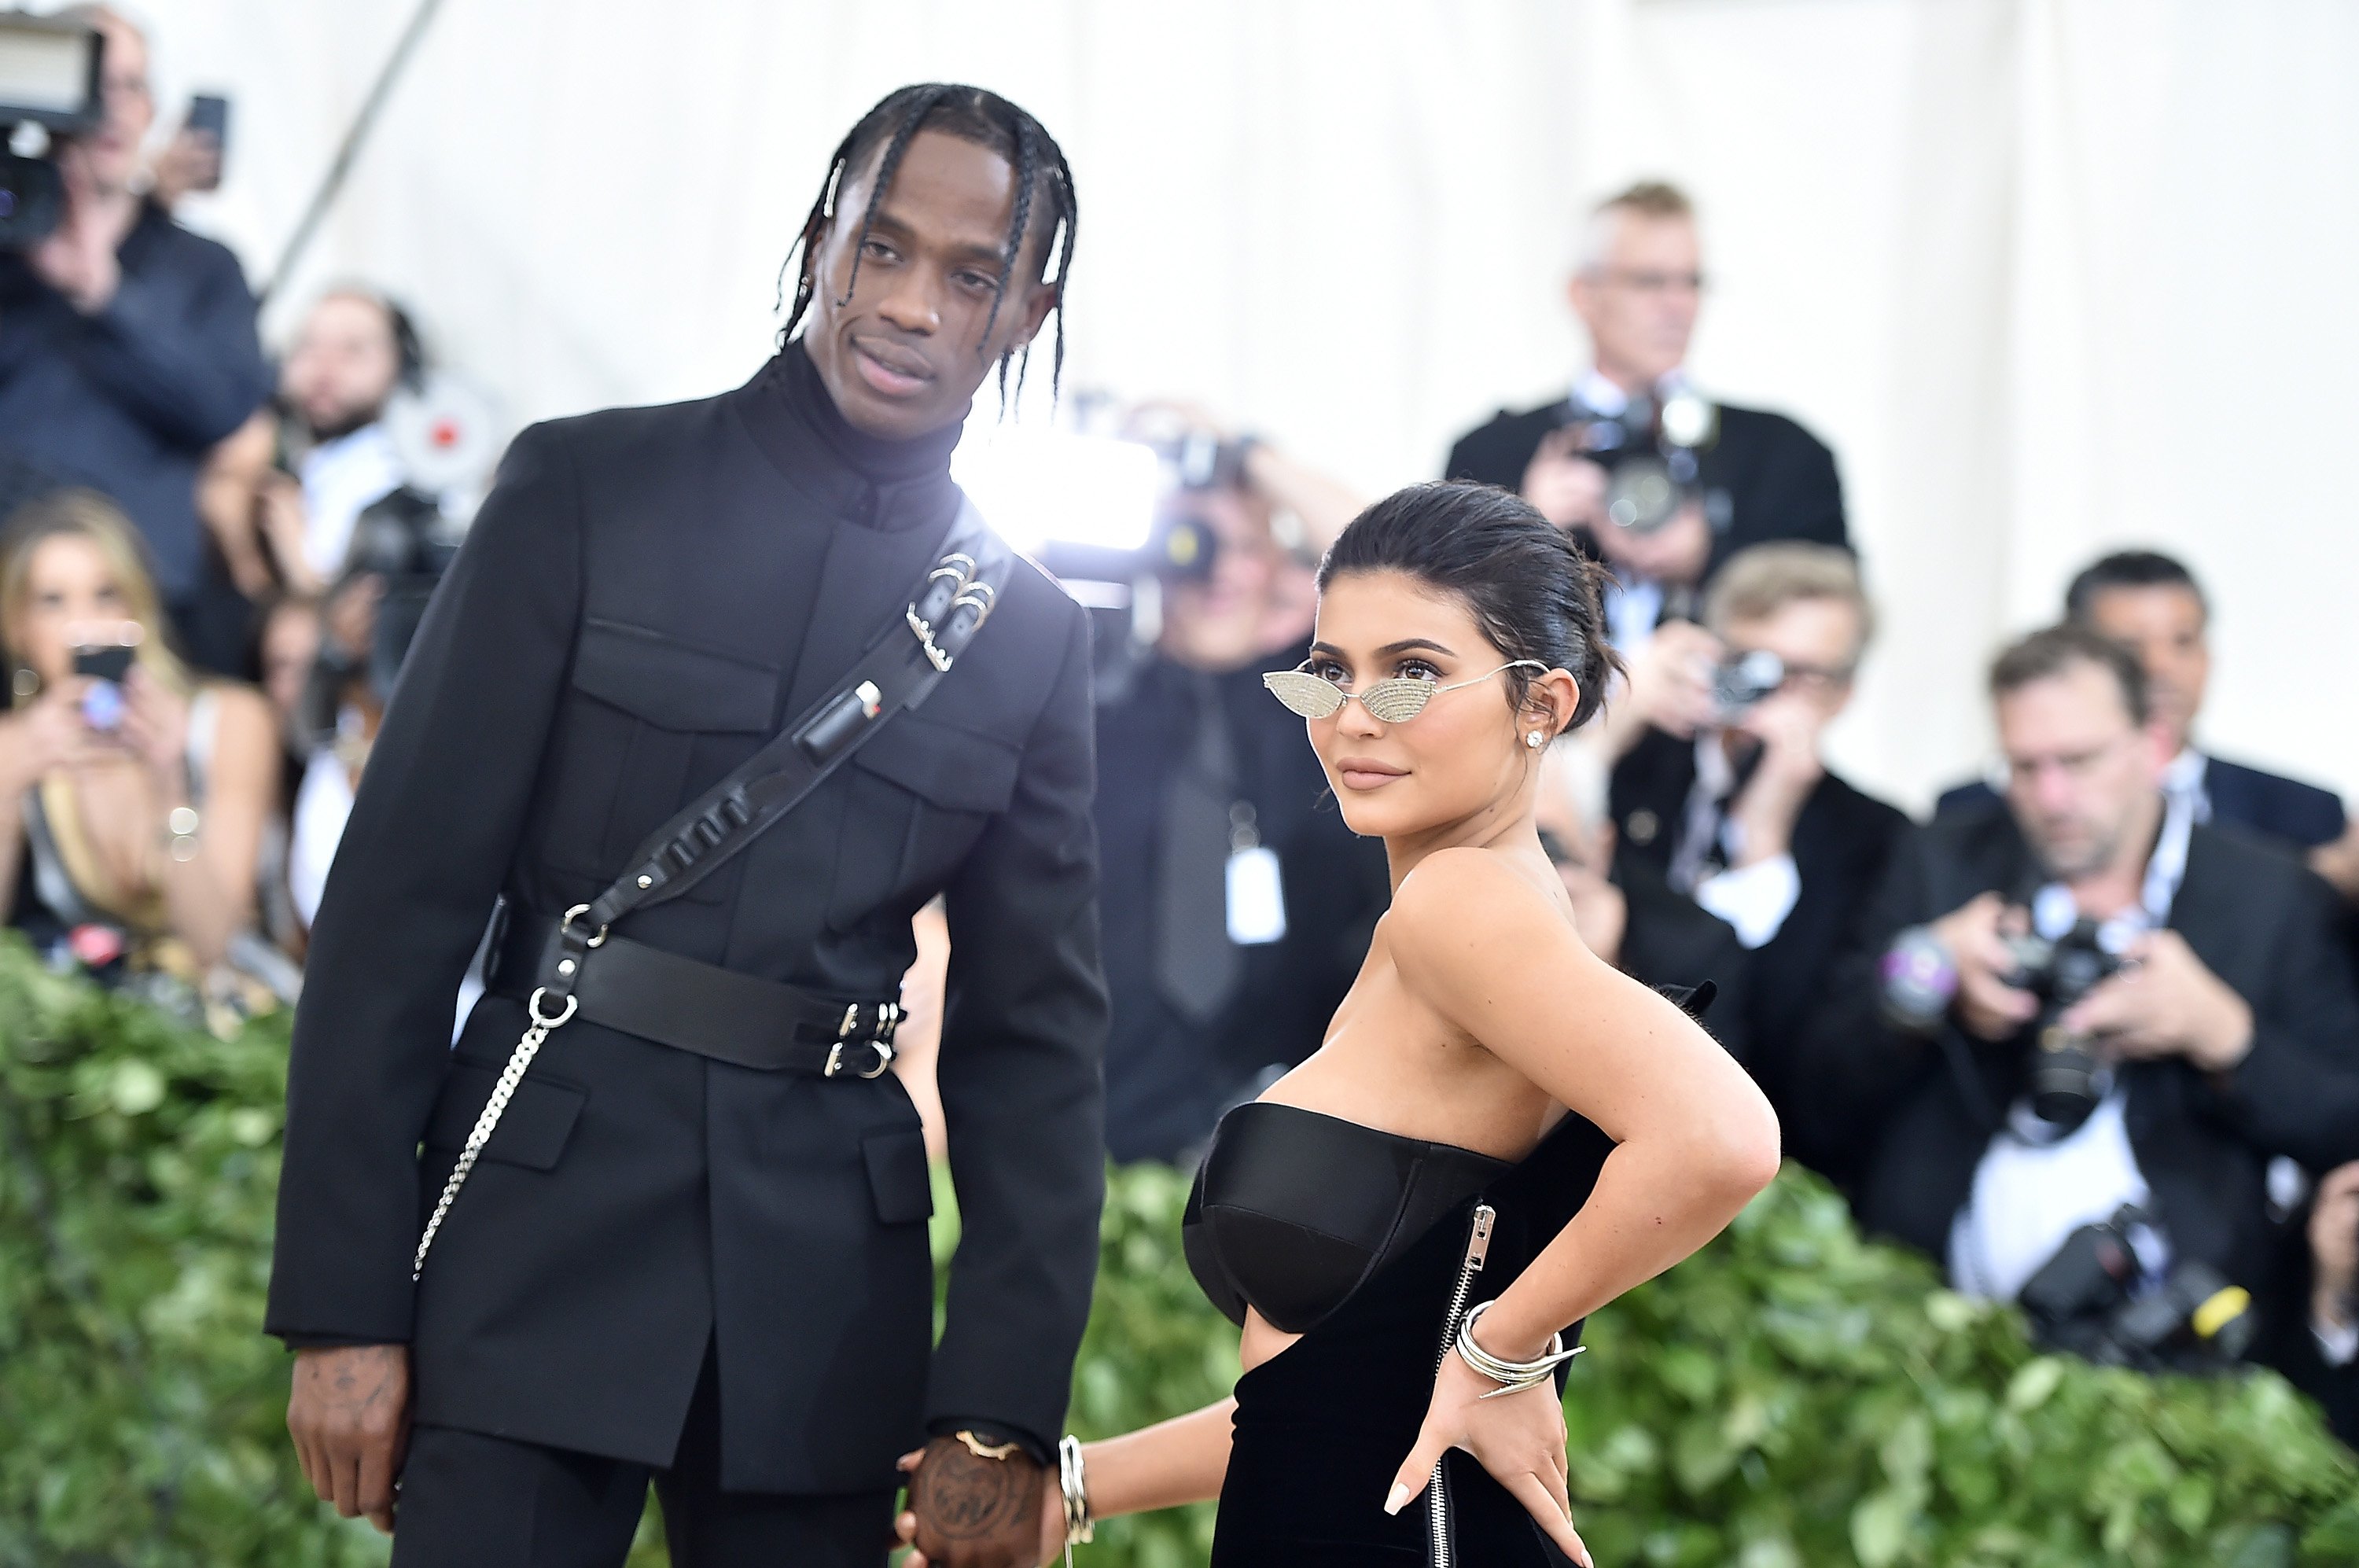 Travis Scott and Kylie Jenner attend the Heavenly Bodies: Fashion & The Catholic Imagination Costume Institute Gala at The Metropolitan Museum of Art on May 7, 2018 | Photo: GettyImages